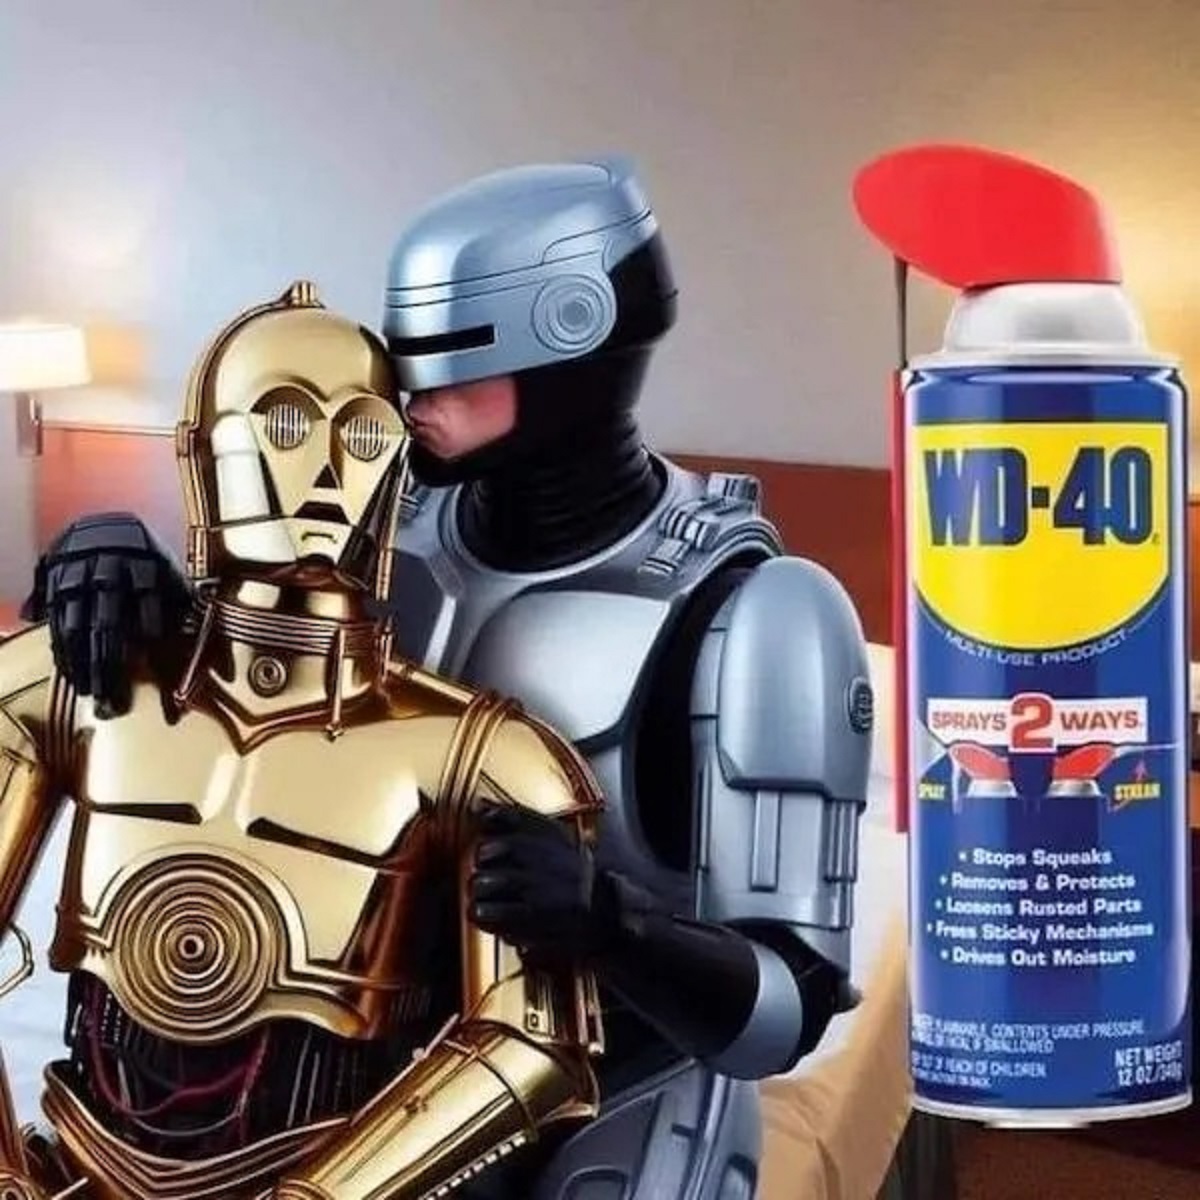 spicy memes - robocop c3po - Preterar Wd40 Luse Sprays Play Ways Stops Squeaks Removes & Protects Loosens Rusted Parts Frees Sticky Mechanisms Drives Out Moisture A Contents Under Pressure Rea Of Children Ssx Net Weight 12 07340